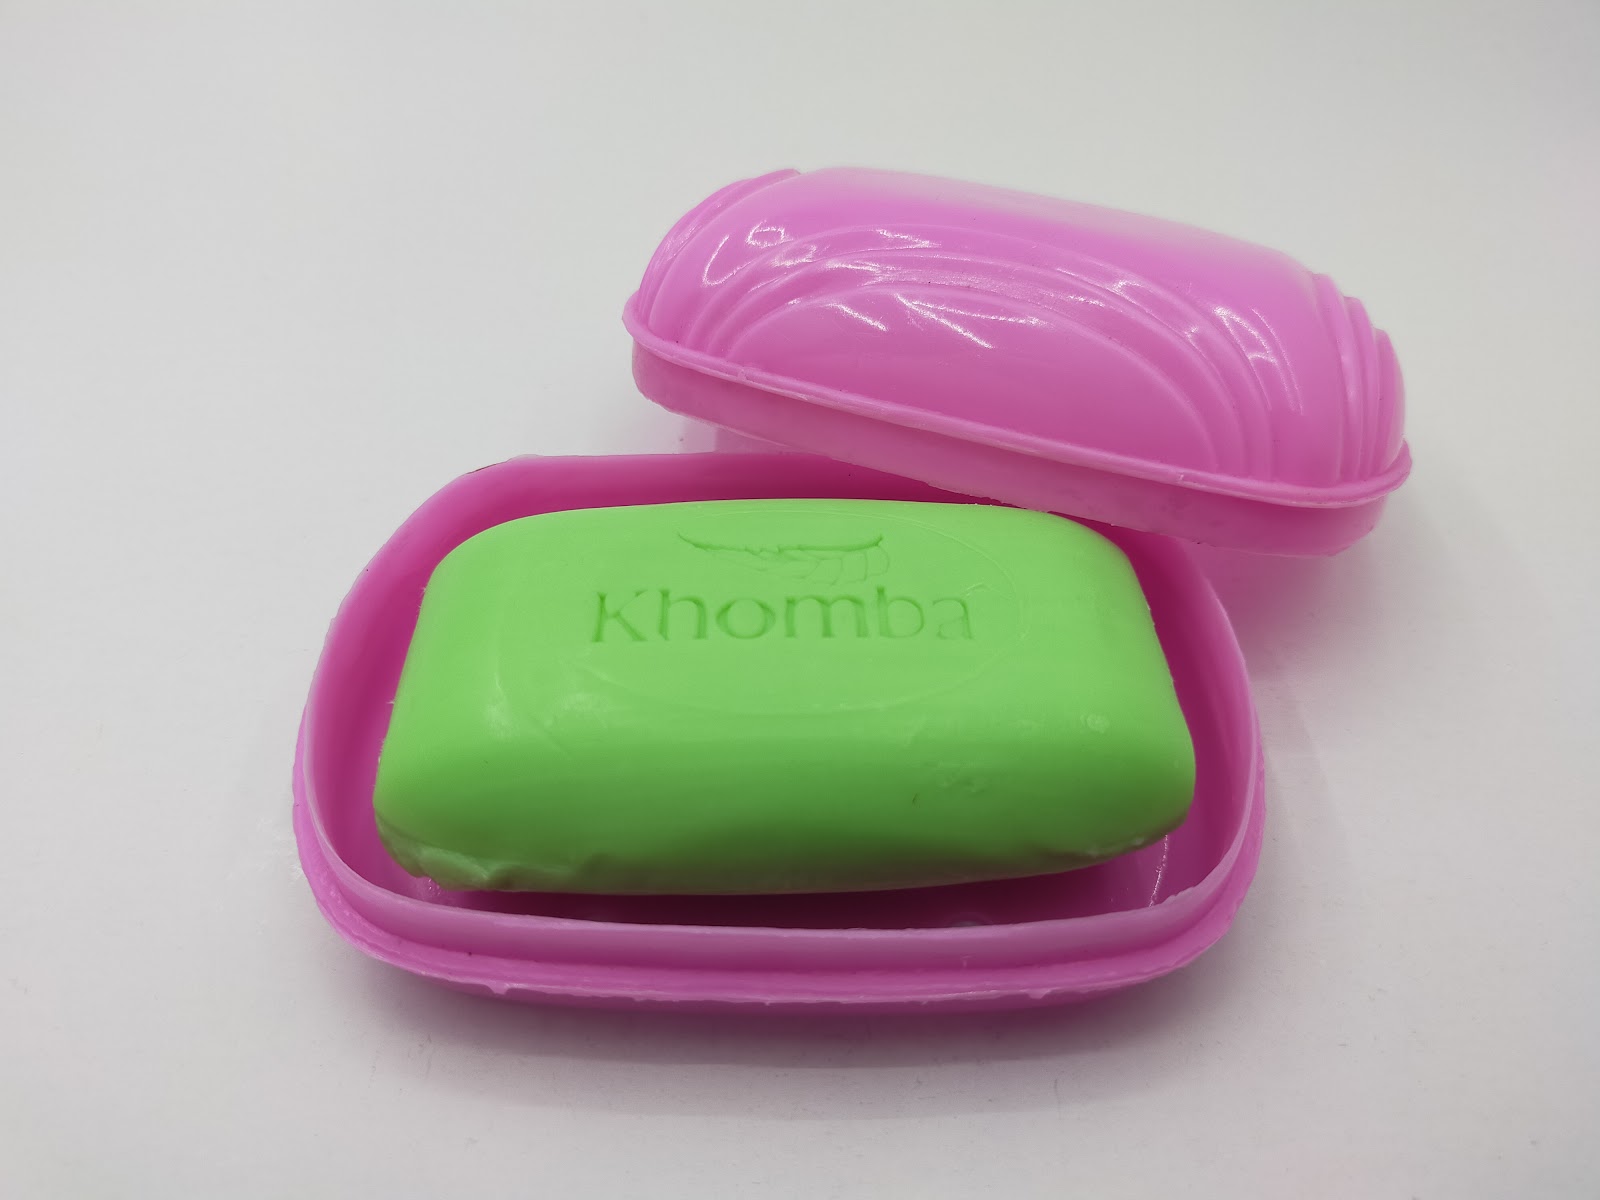 1pcs Plastic Soap Case Box Holder Dish Container for Outdoor Travel Home Use Only Box No Soap